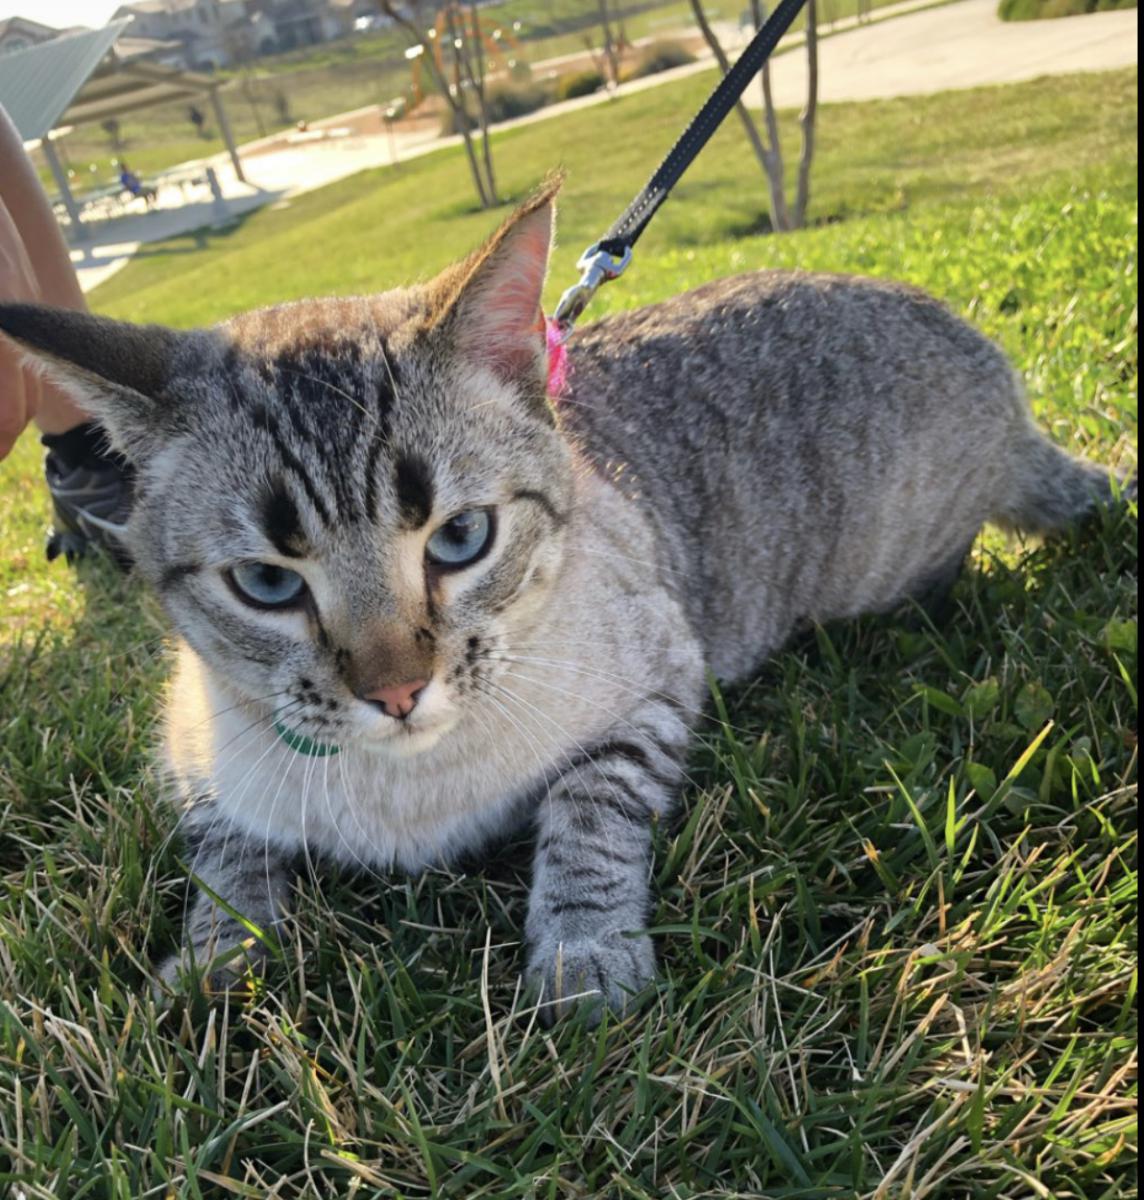 Image of BamBam, Lost Cat